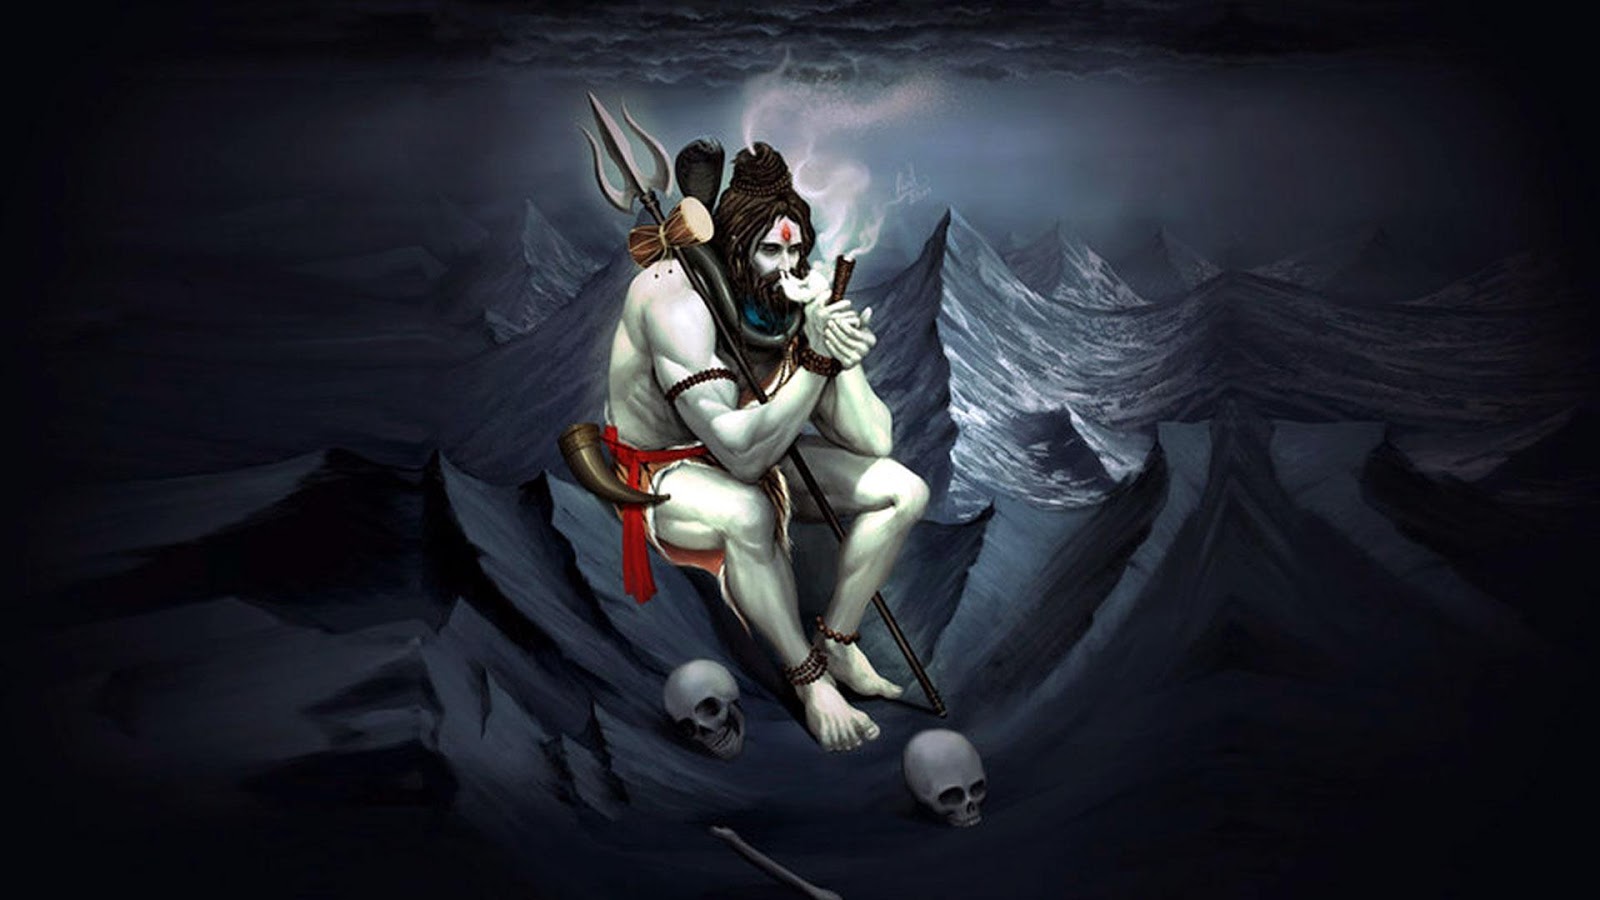 Lord Shiva images, wallpapers, photos & pics, download Lord Shiva ...